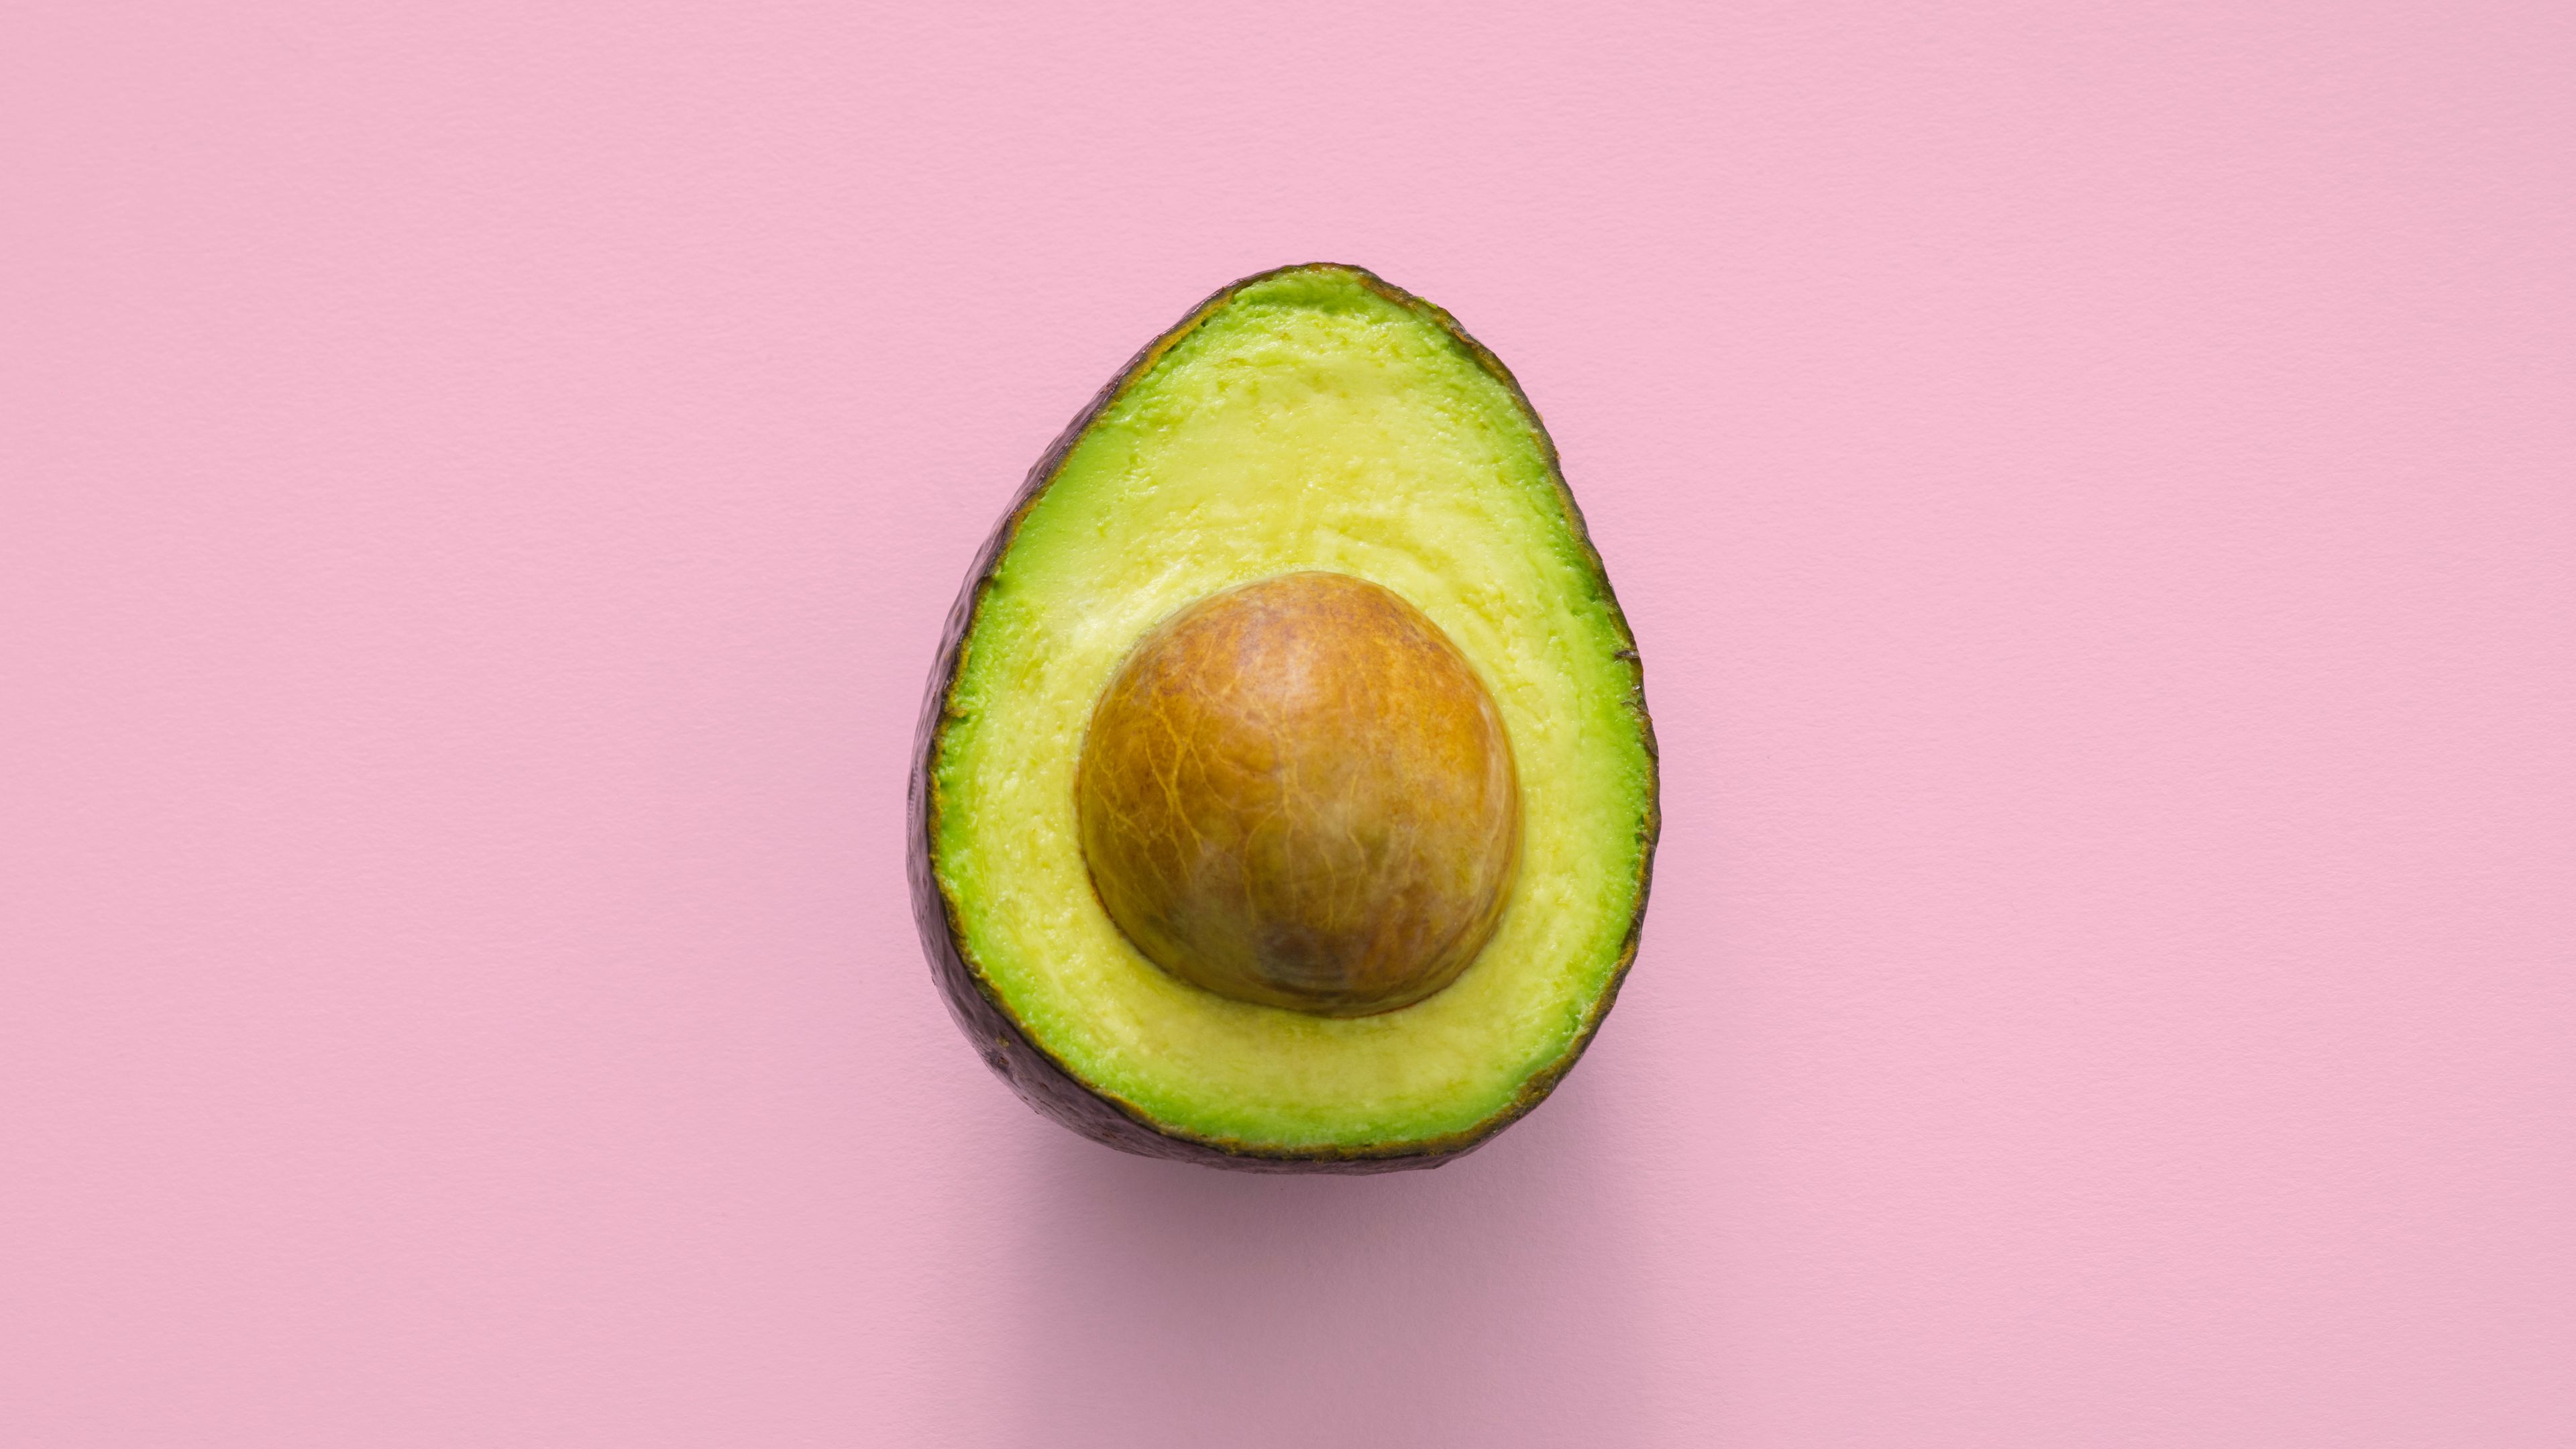 Pink avocado only fans